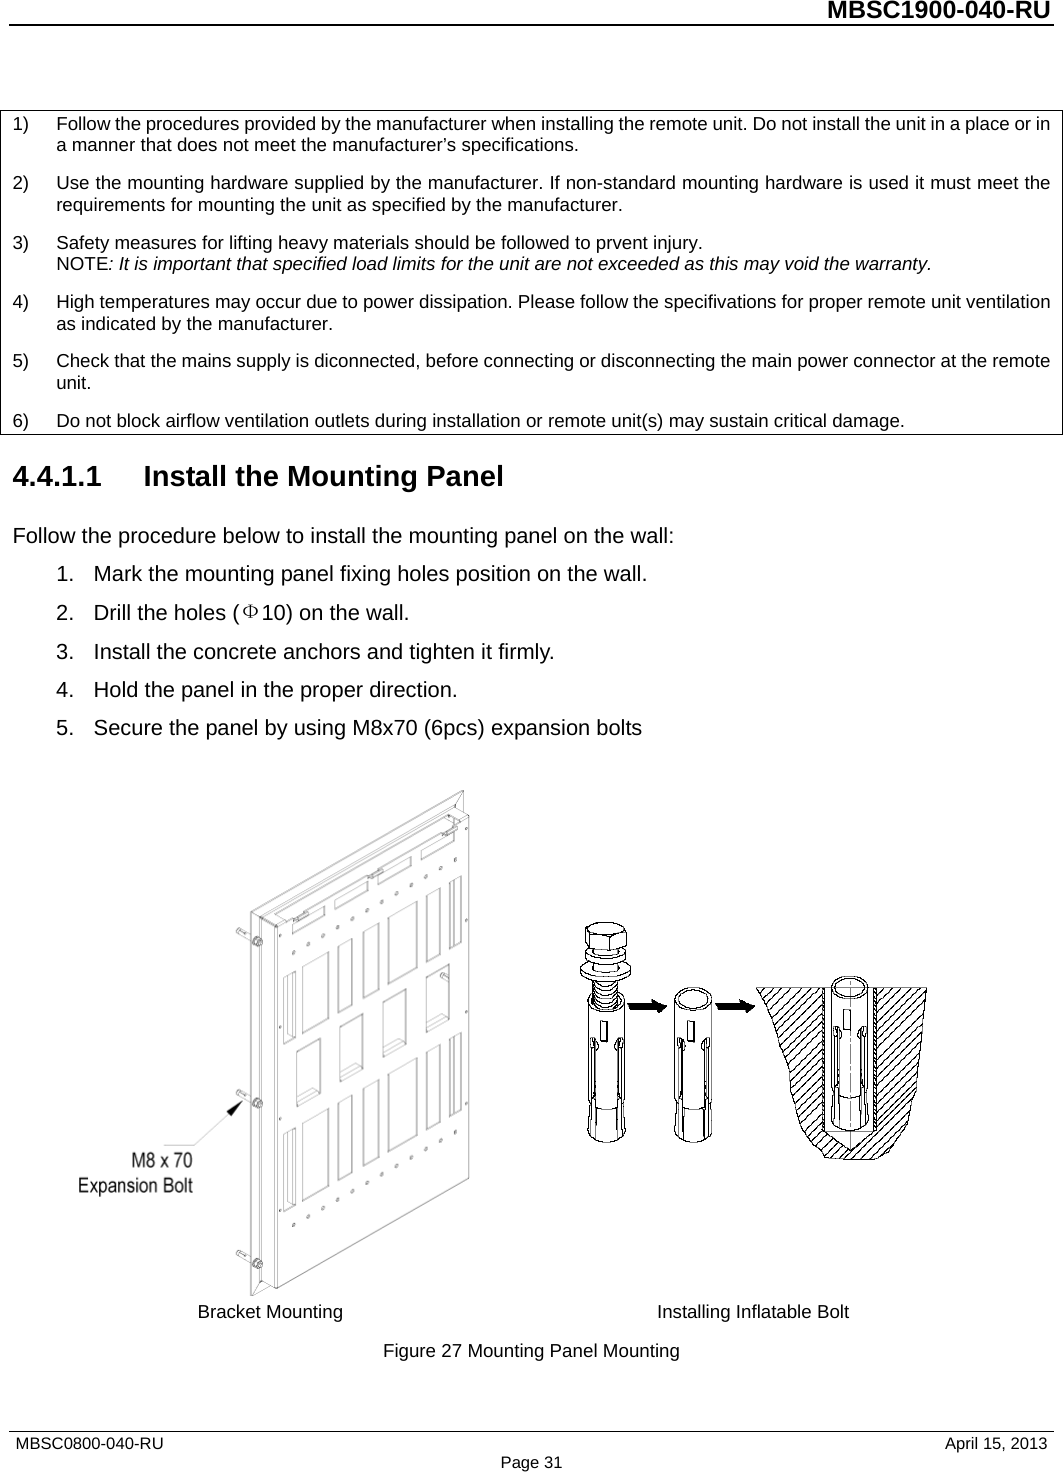          MBSC1900-040-RU   1) Follow the procedures provided by the manufacturer when installing the remote unit. Do not install the unit in a place or in a manner that does not meet the manufacturer’s specifications. 2) Use the mounting hardware supplied by the manufacturer. If non-standard mounting hardware is used it must meet the requirements for mounting the unit as specified by the manufacturer. 3) Safety measures for lifting heavy materials should be followed to prvent injury. NOTE: It is important that specified load limits for the unit are not exceeded as this may void the warranty. 4) High temperatures may occur due to power dissipation. Please follow the specifivations for proper remote unit ventilation as indicated by the manufacturer. 5) Check that the mains supply is diconnected, before connecting or disconnecting the main power connector at the remote unit. 6) Do not block airflow ventilation outlets during installation or remote unit(s) may sustain critical damage. 4.4.1.1 Install the Mounting Panel Follow the procedure below to install the mounting panel on the wall: 1. Mark the mounting panel fixing holes position on the wall. 2. Drill the holes (Ф10) on the wall. 3. Install the concrete anchors and tighten it firmly. 4. Hold the panel in the proper direction. 5. Secure the panel by using M8x70 (6pcs) expansion bolts    Bracket Mounting Installing Inflatable Bolt Figure 27 Mounting Panel Mounting MBSC0800-040-RU                                      April 15, 2013 Page 31 